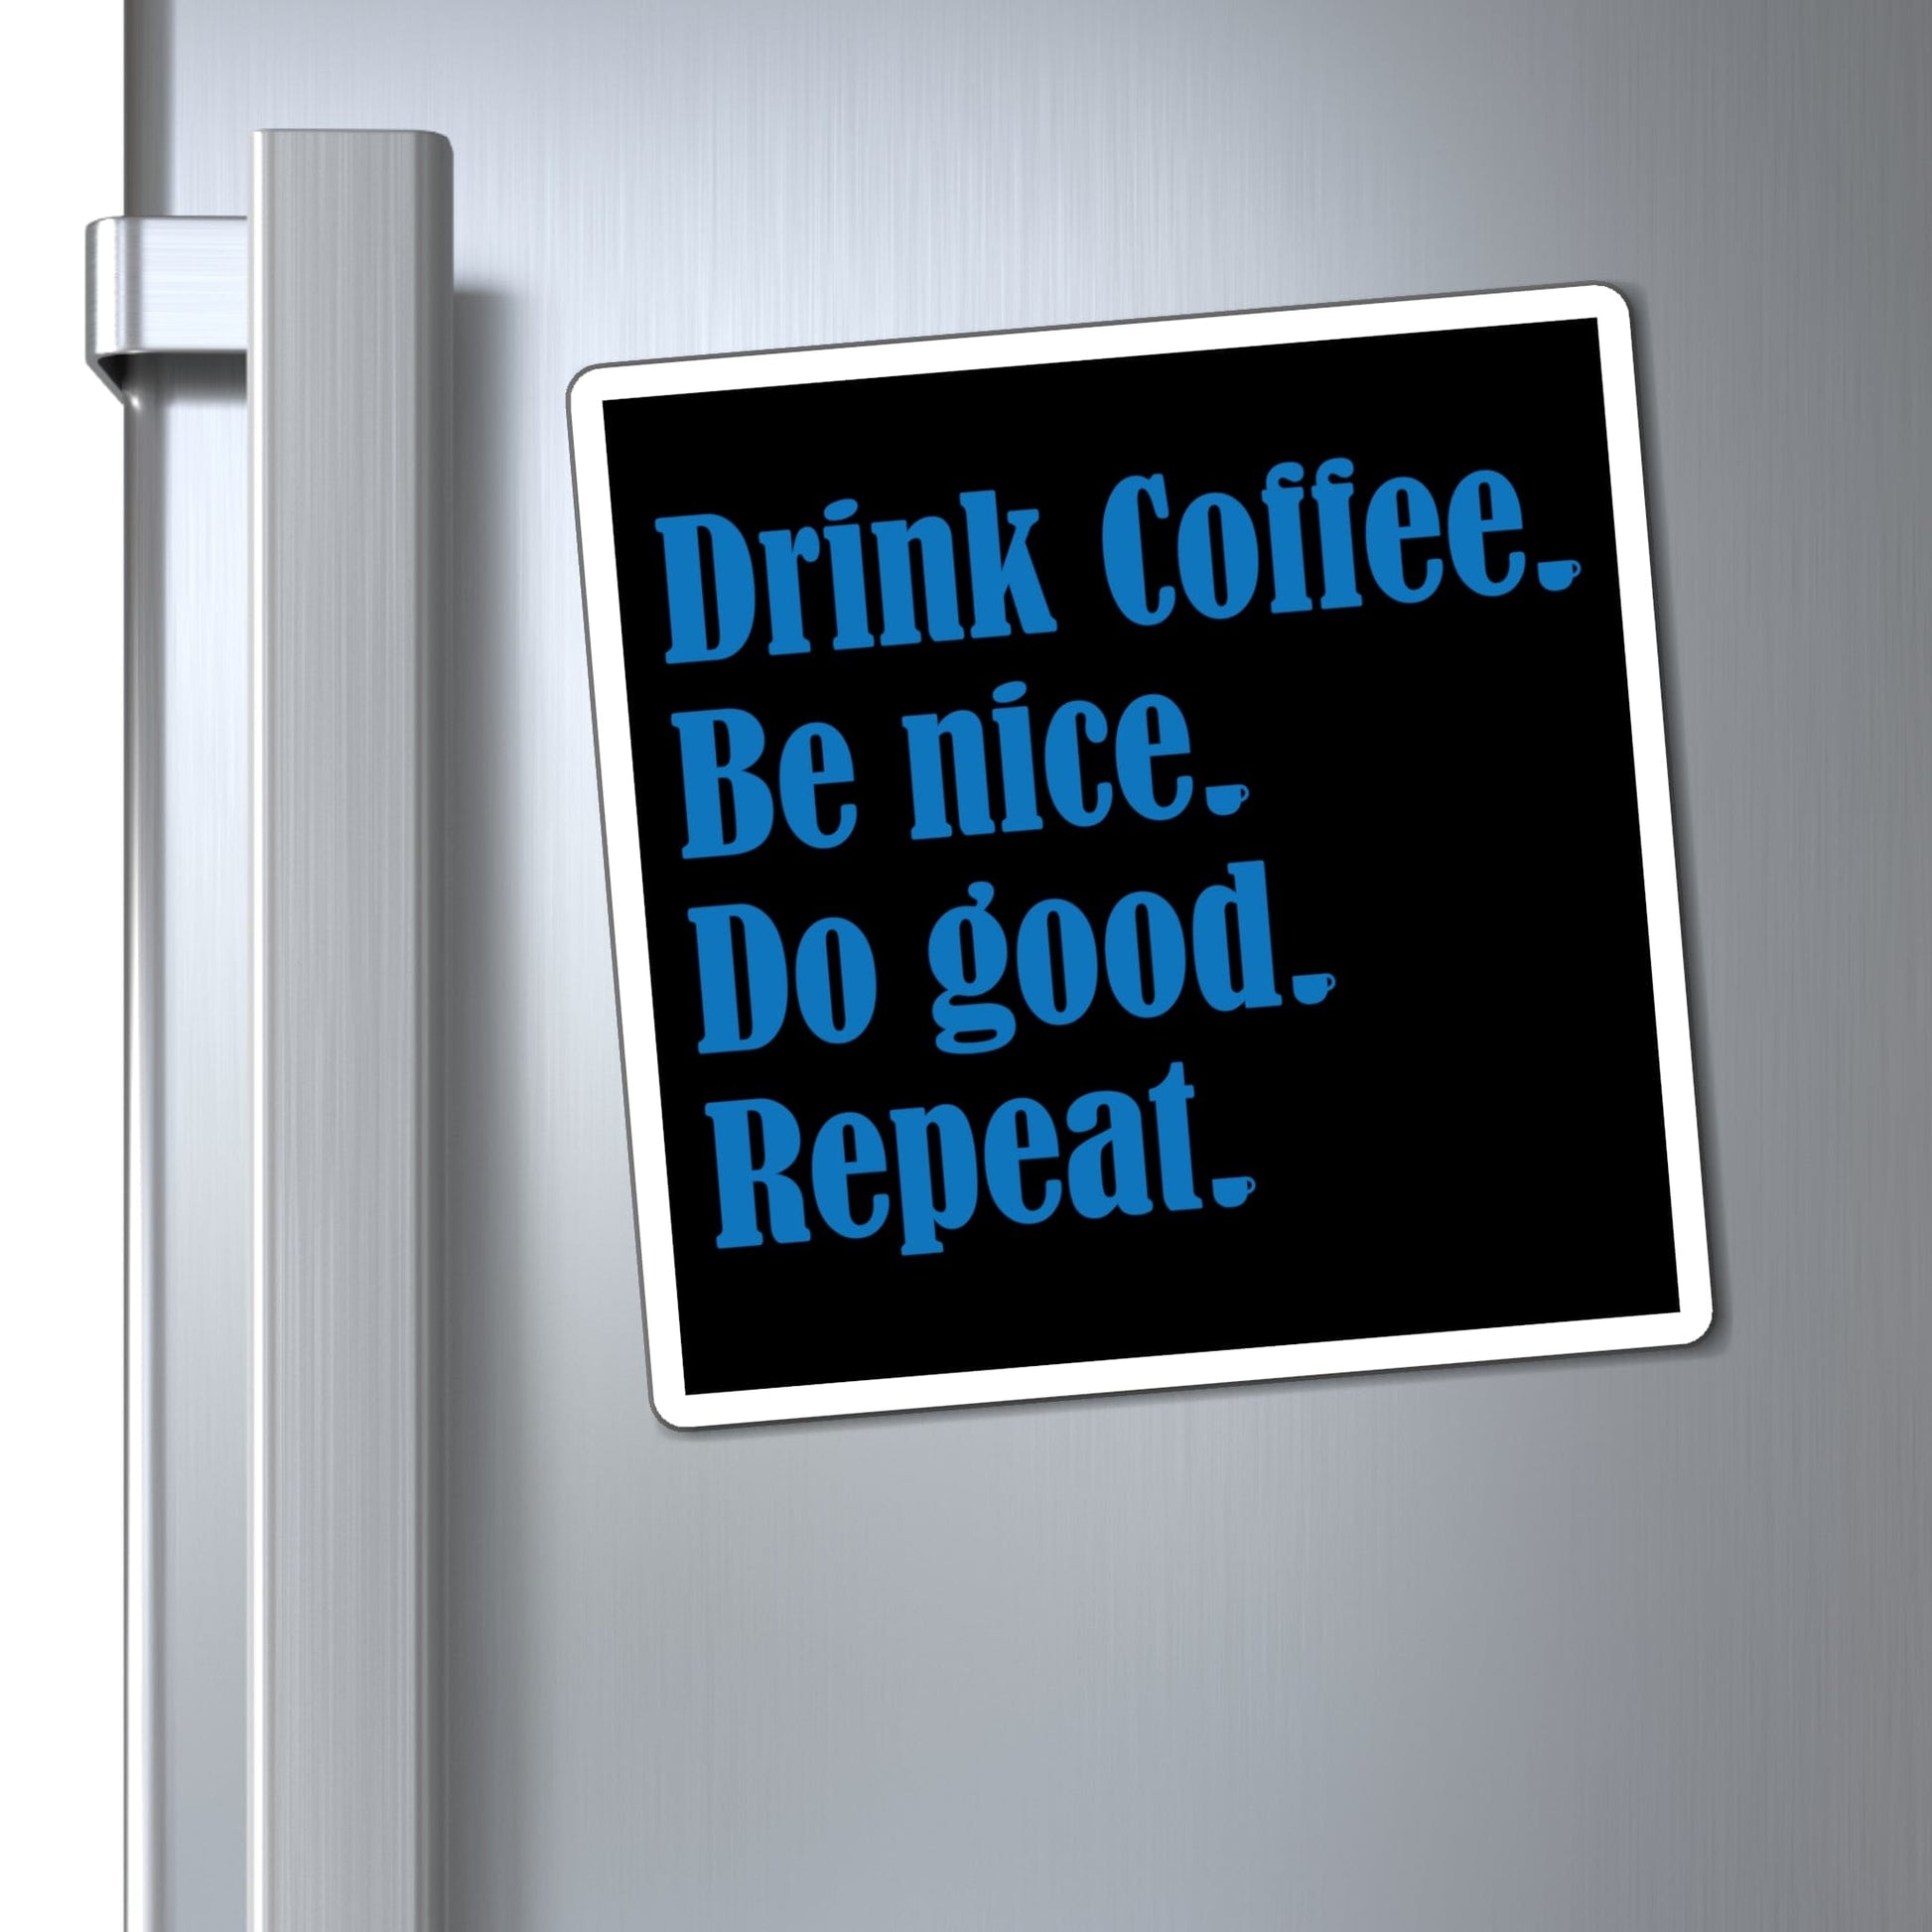 Good Bean Gifts "Drink Coffee, Be Nice, Do Good, Repeat" Magnets